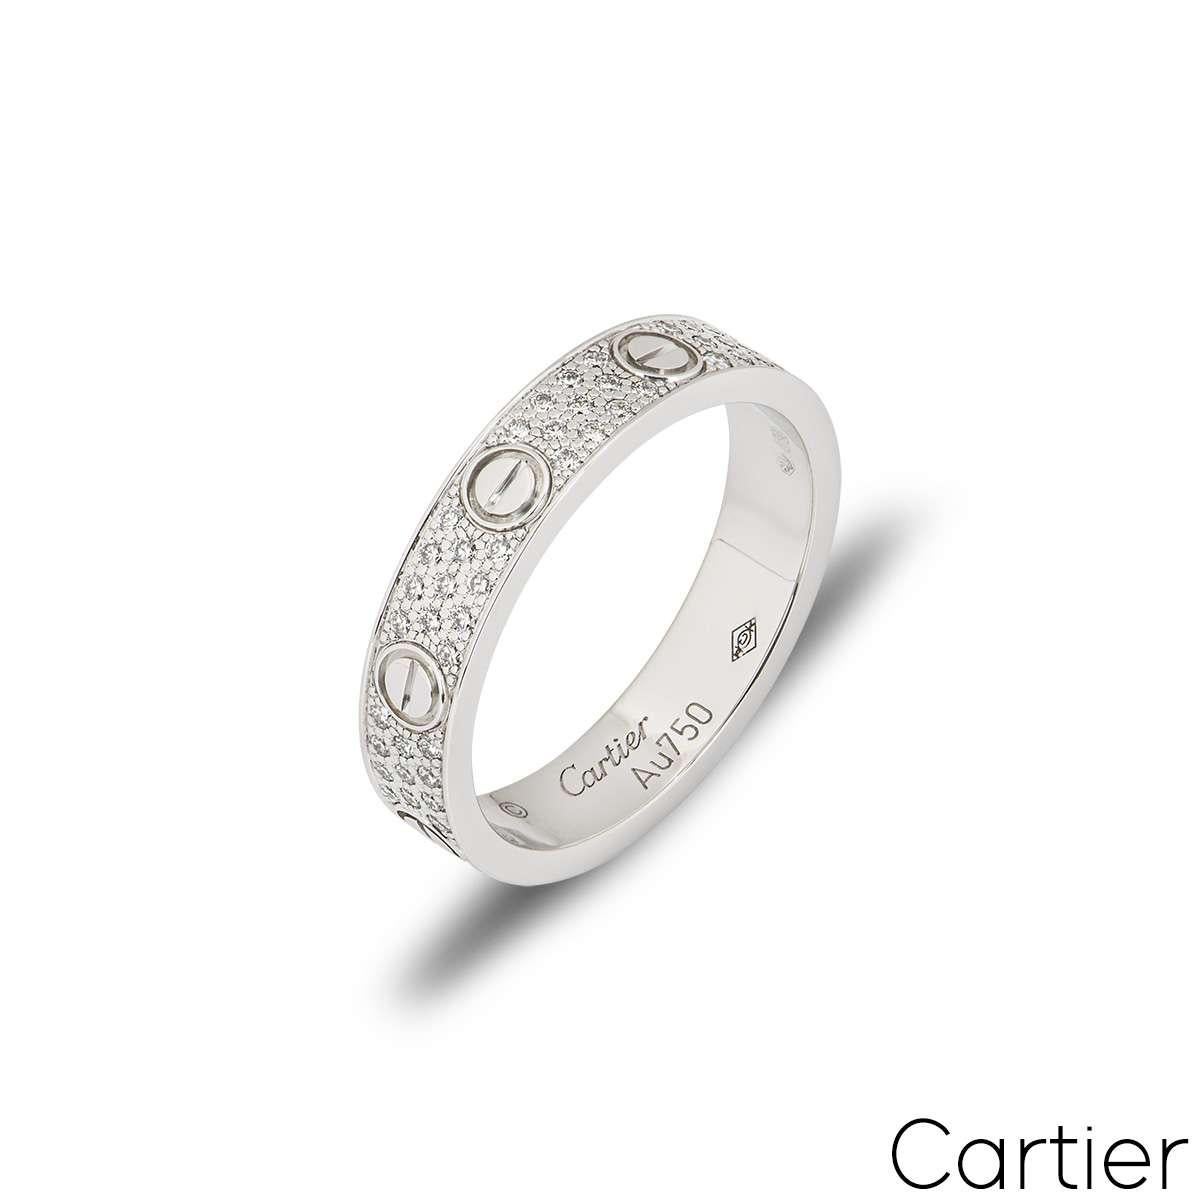 An 18k white gold Cartier diamond pave ring from the Love collection. The ring comprises of the iconic Cartier screws motifs and 88 round brilliant cut diamonds totalling 0.31ct set between each screw. Measuring 5mm in width and a size UK N½ - EU